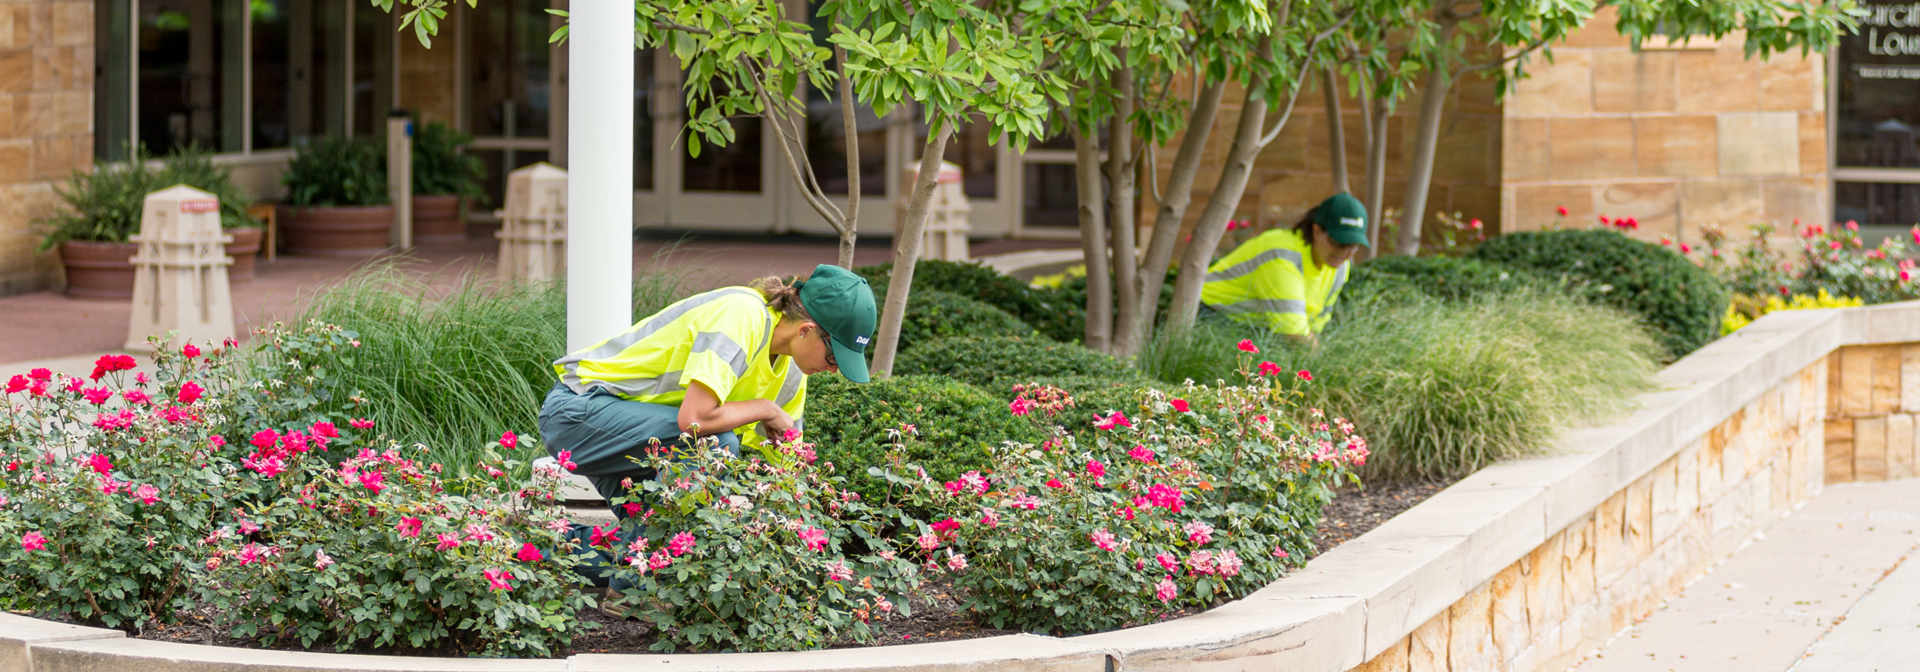 Hospitality Landscaping Services